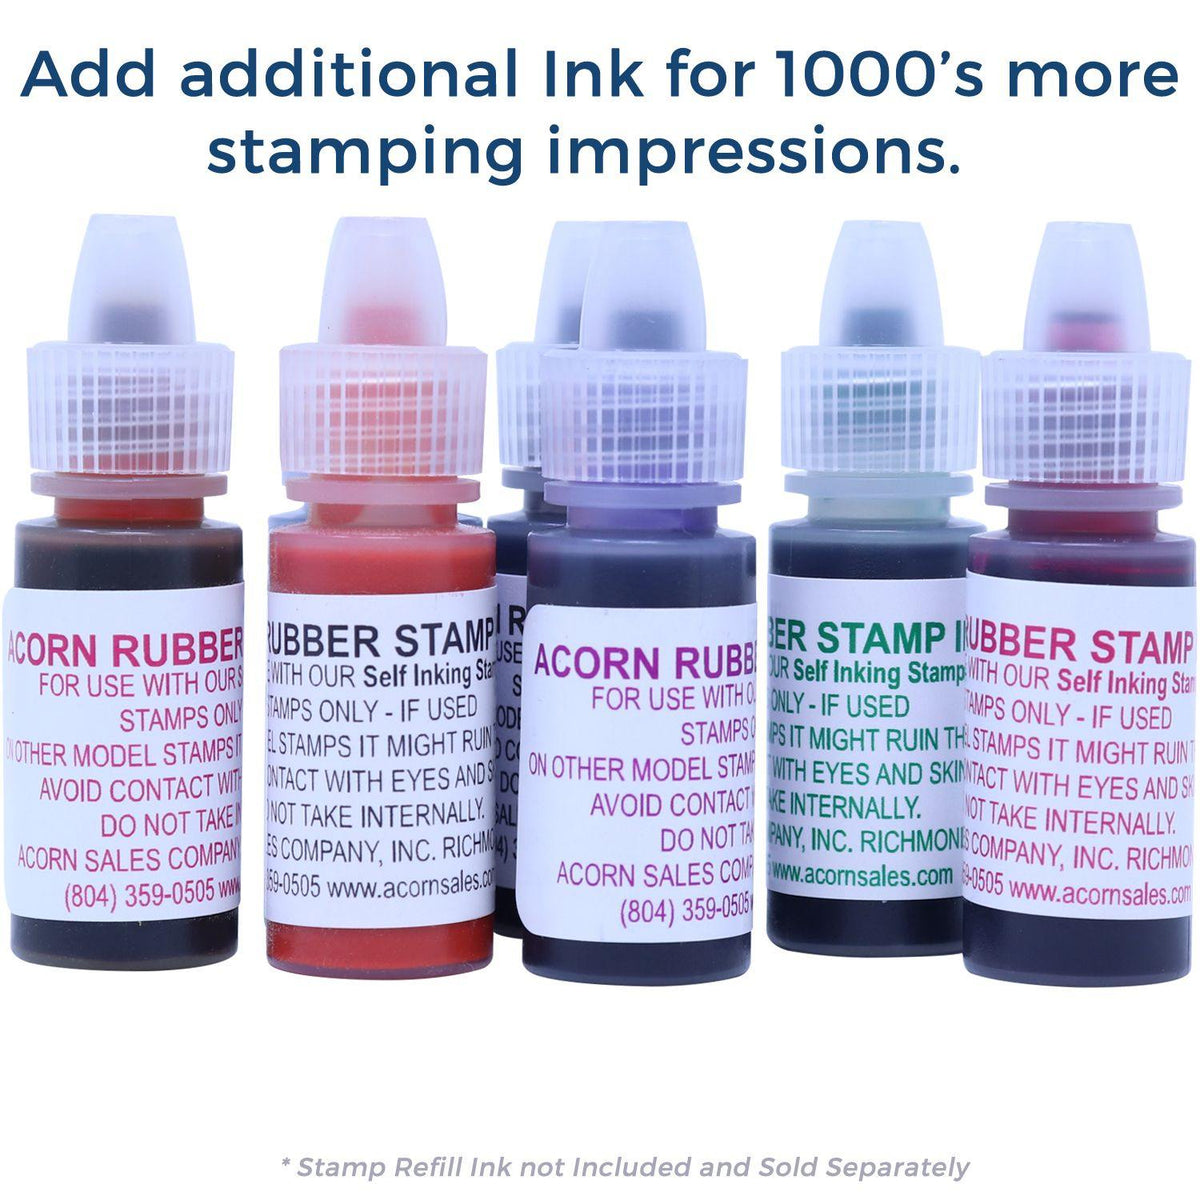 Refill Inks for Large Pre-Inked Self-Quarantine Stamp Available